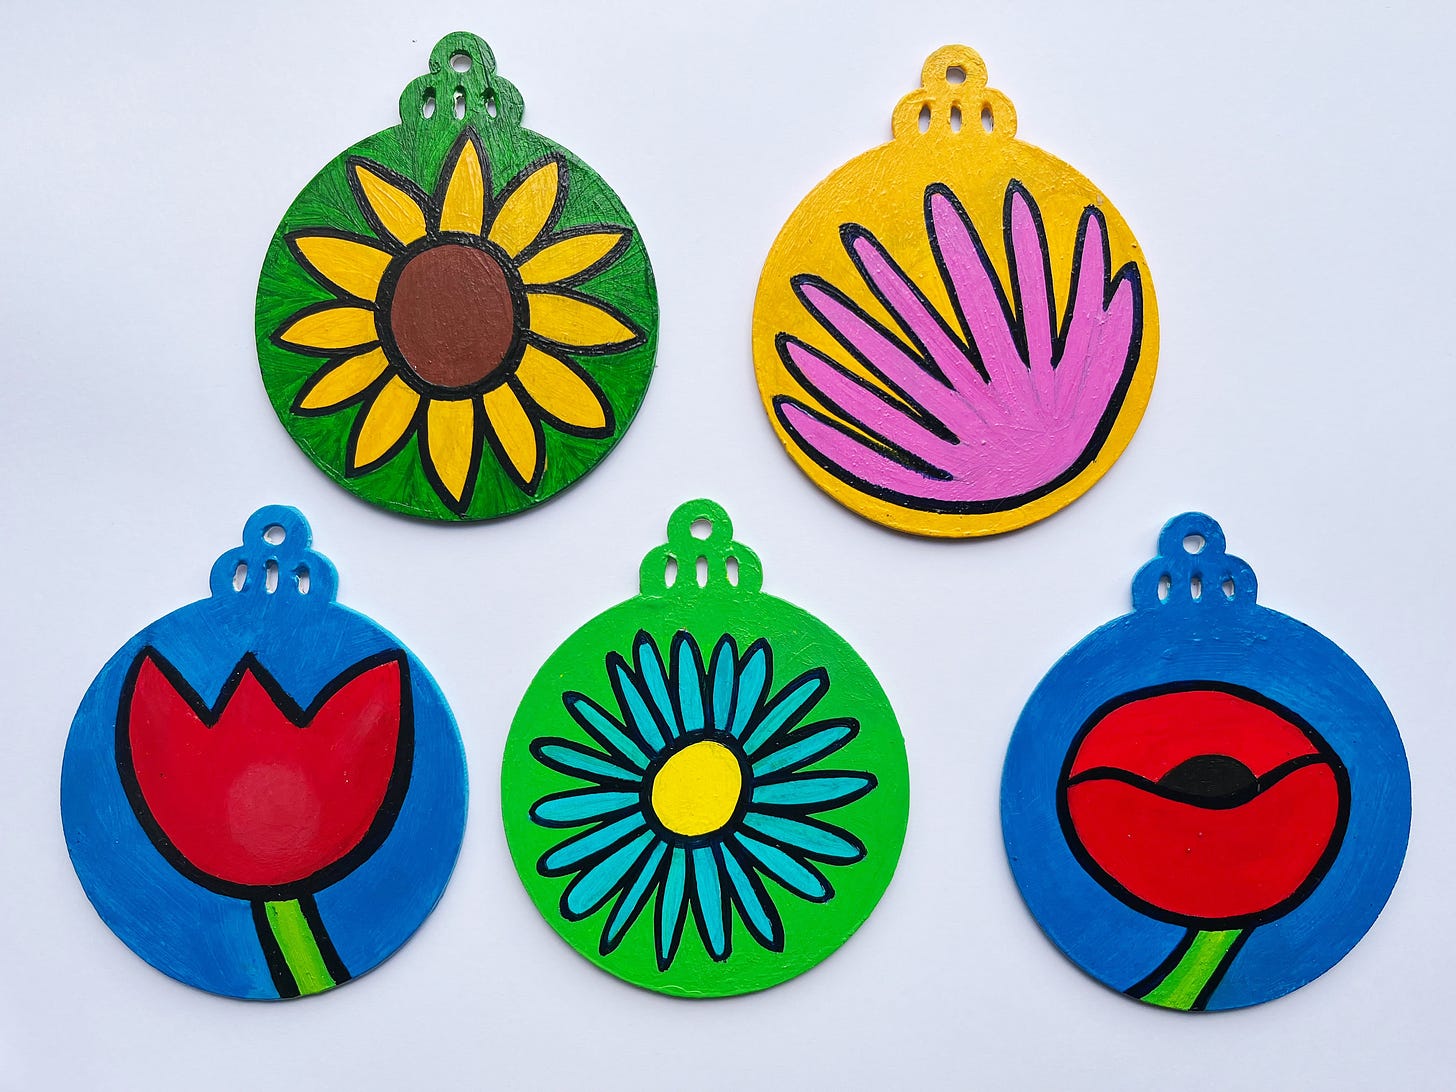 Five Christmas ornaments representing flowers